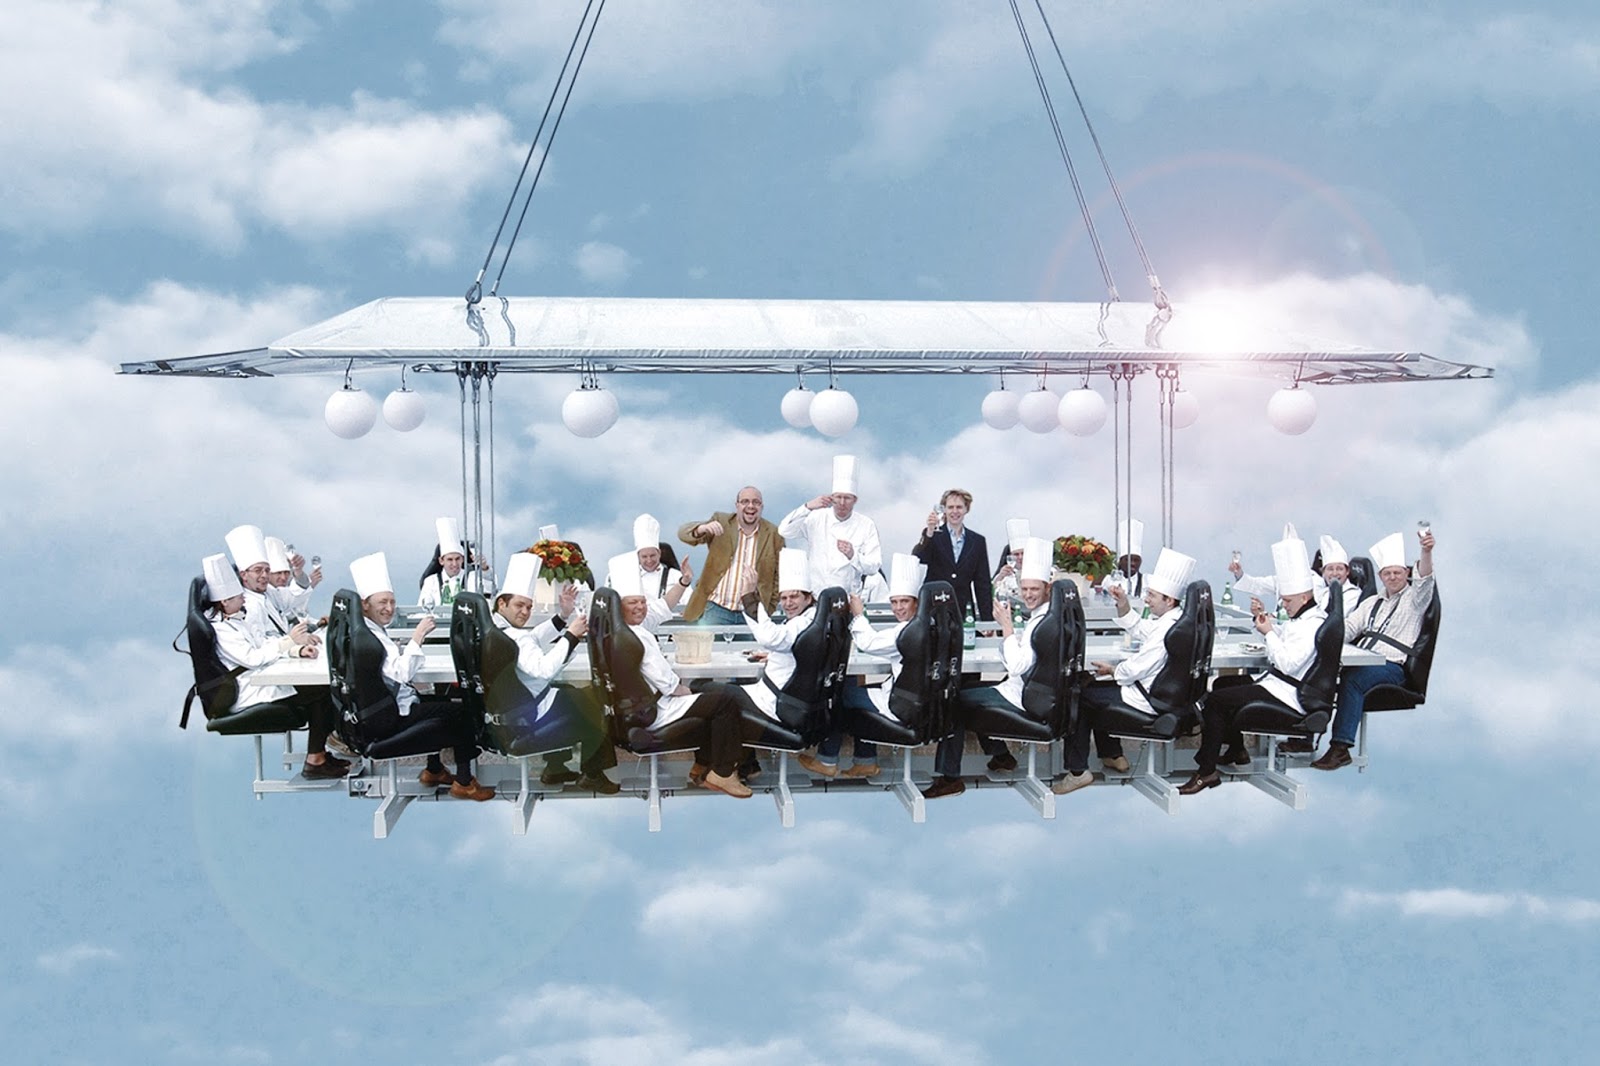 LosAngelesVille: Dinner In The Sky Launches In Los Angeles On July 1